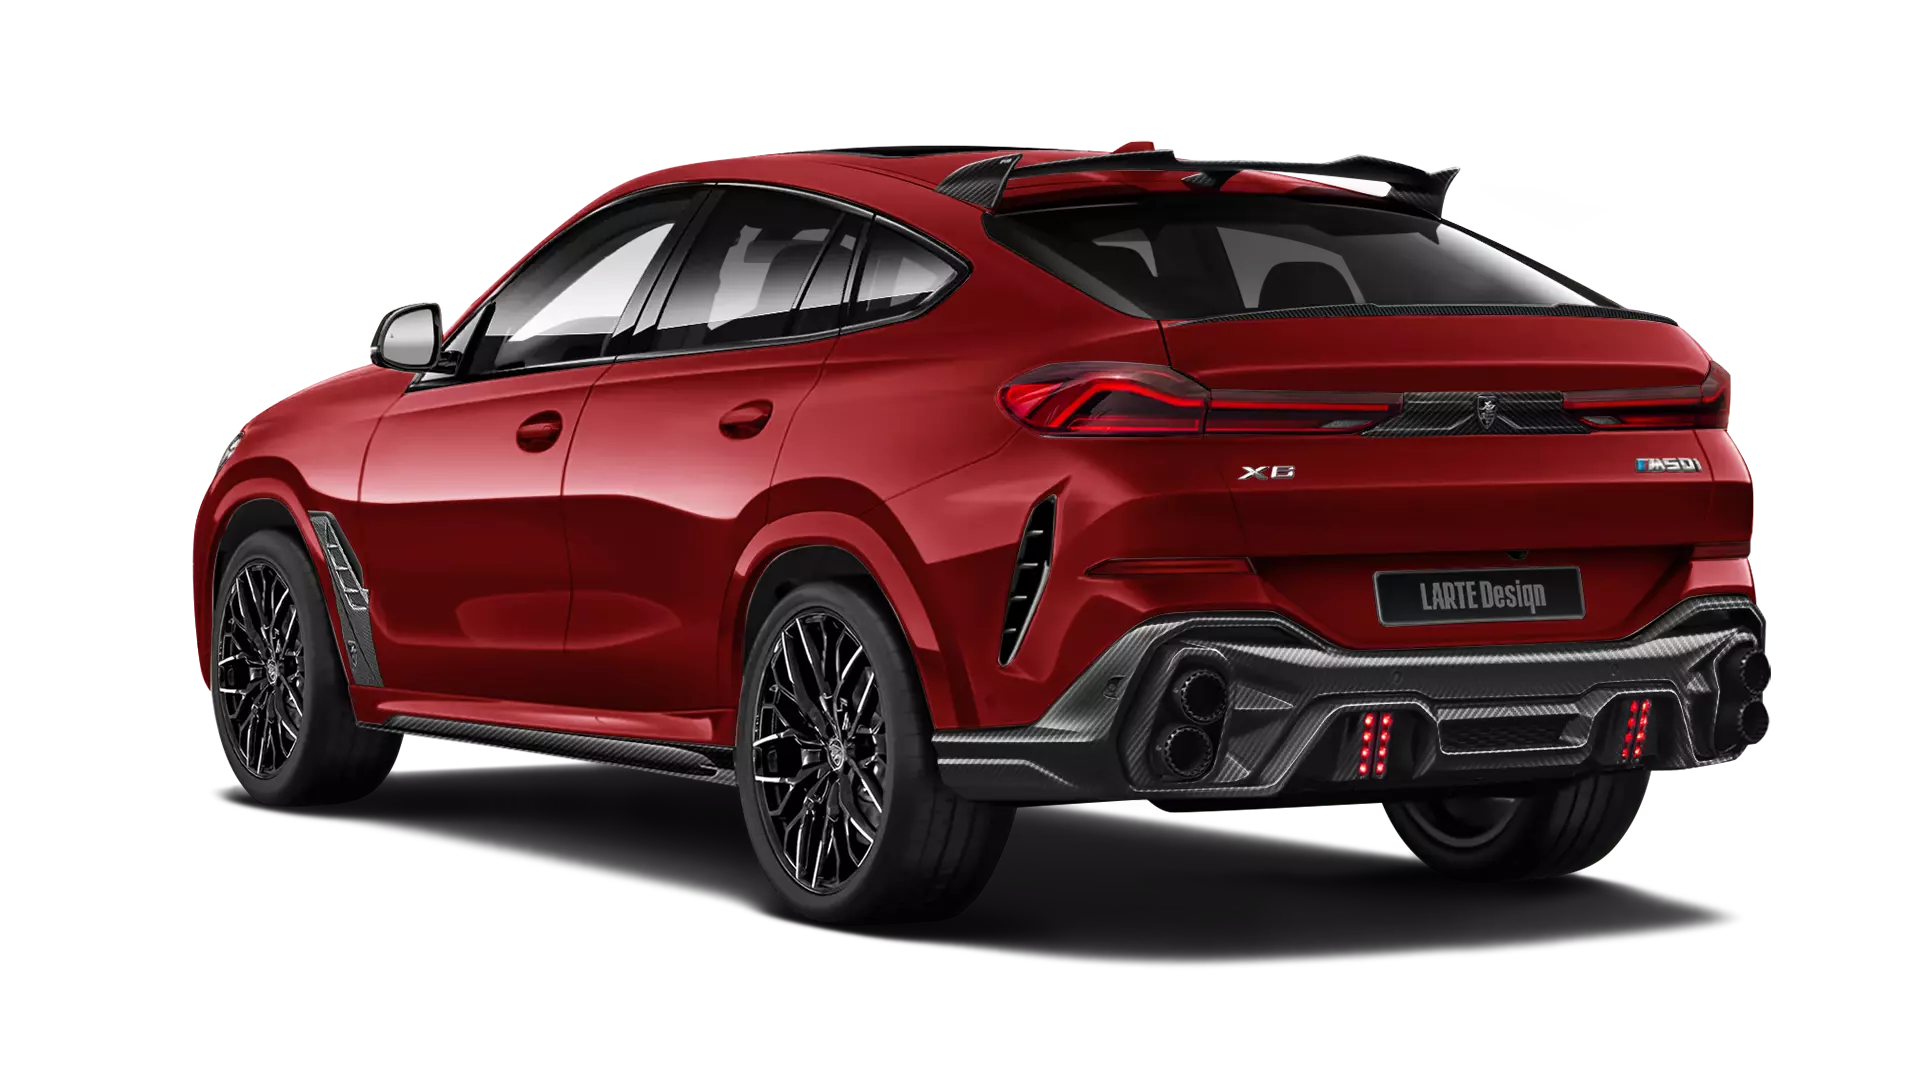 BMW X6 with carbon body kit: rear view shown in flamenco red